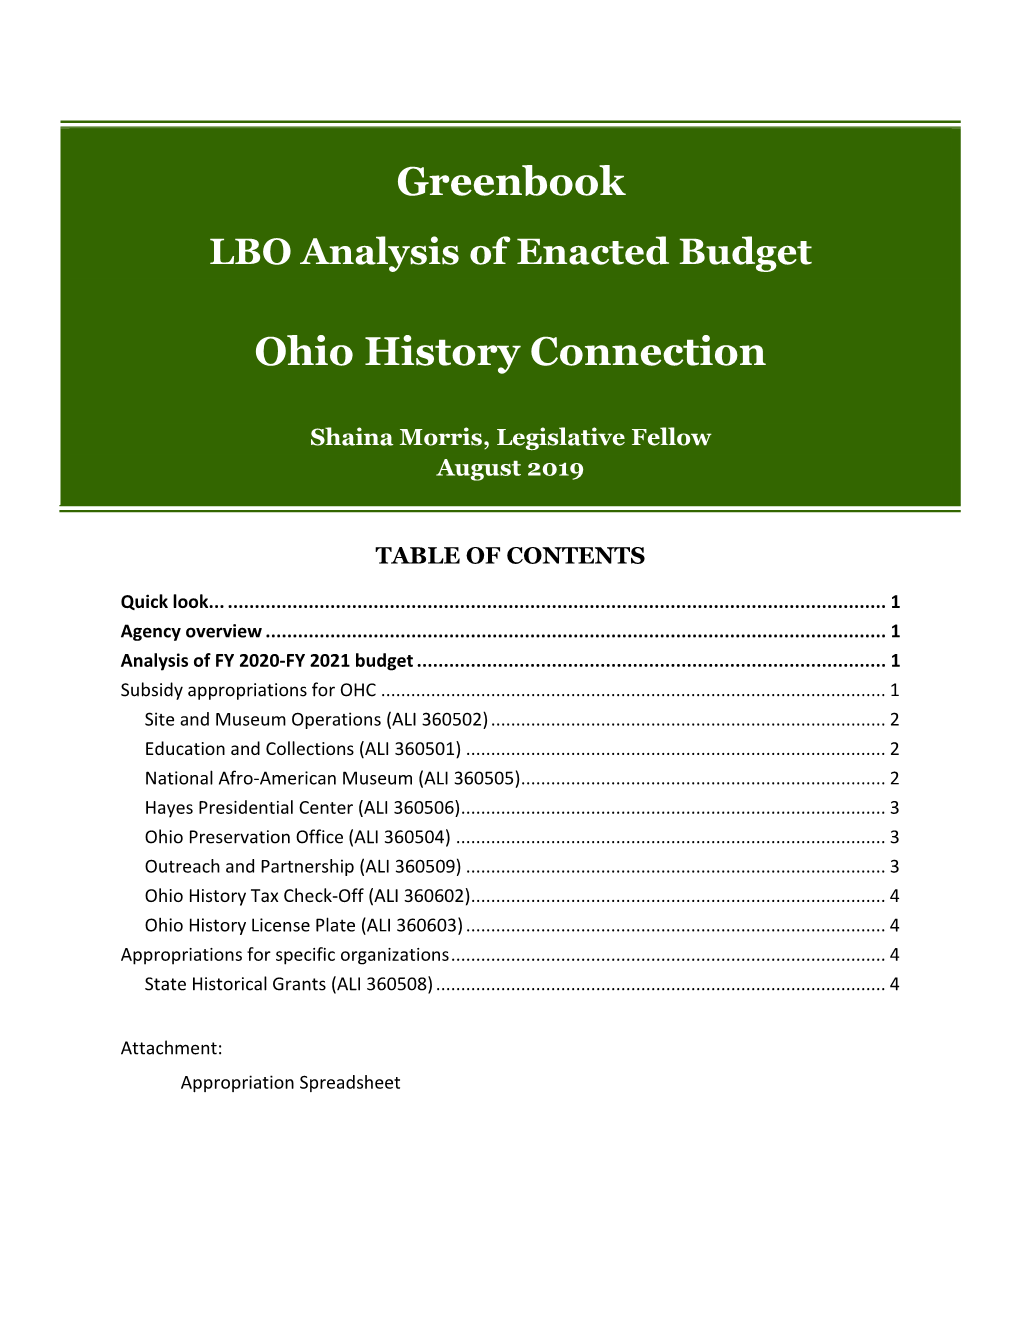 Greenbook Ohio History Connection